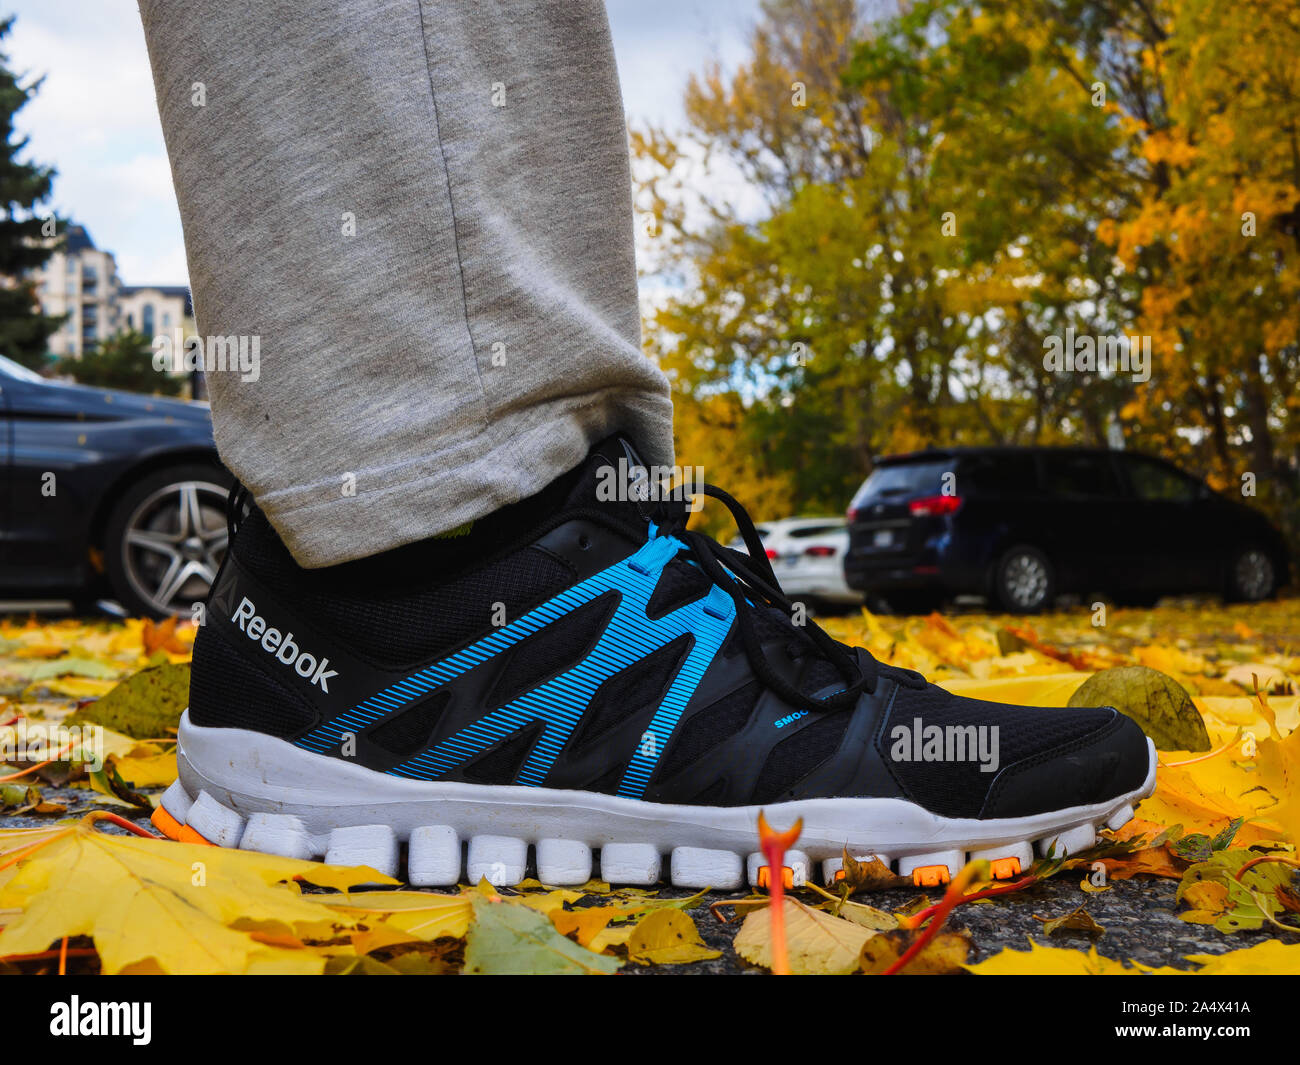 Reebok 4 running shoes stepping around yellow leaves on the ground autumn - Alamy